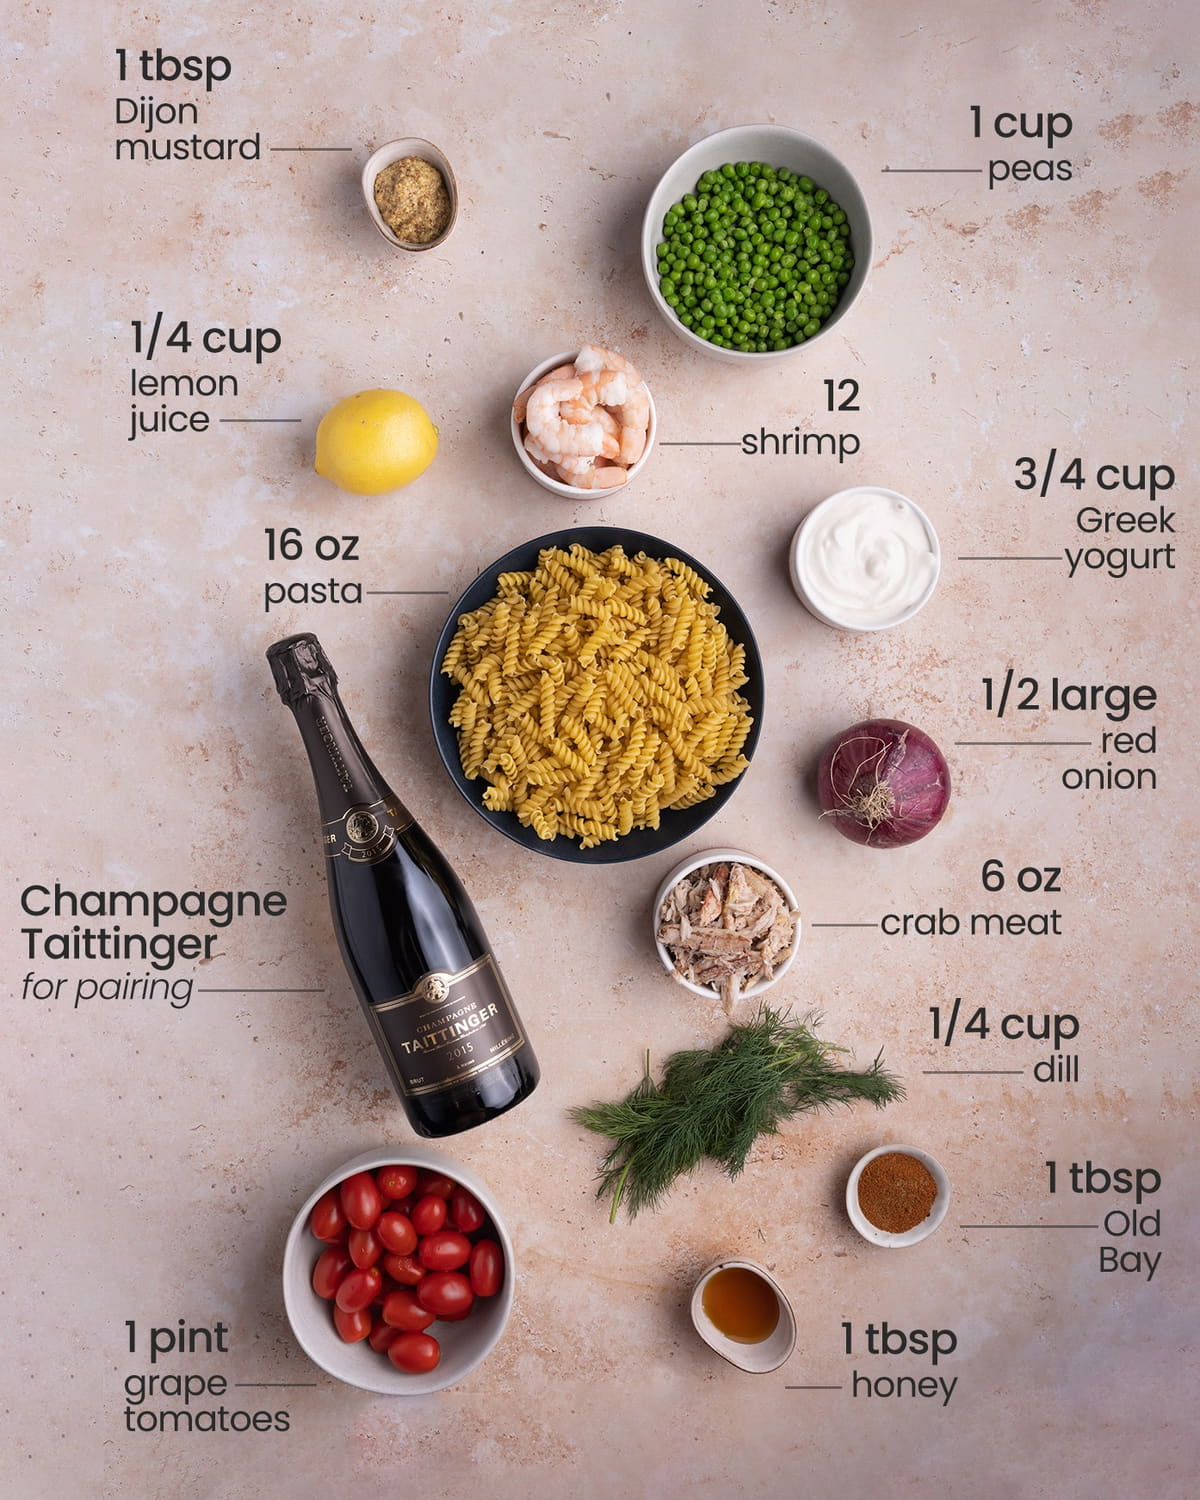 All ingredients for Seafood Pasta including Dijon mustard, green peas, cooked shrimp, lemon, short pasta, Greek Yogurt, red onion, crab meat, fresh dill, Old Bay Seasoning, honey, grape tomatoes, and Champagne Taittinger for pairing